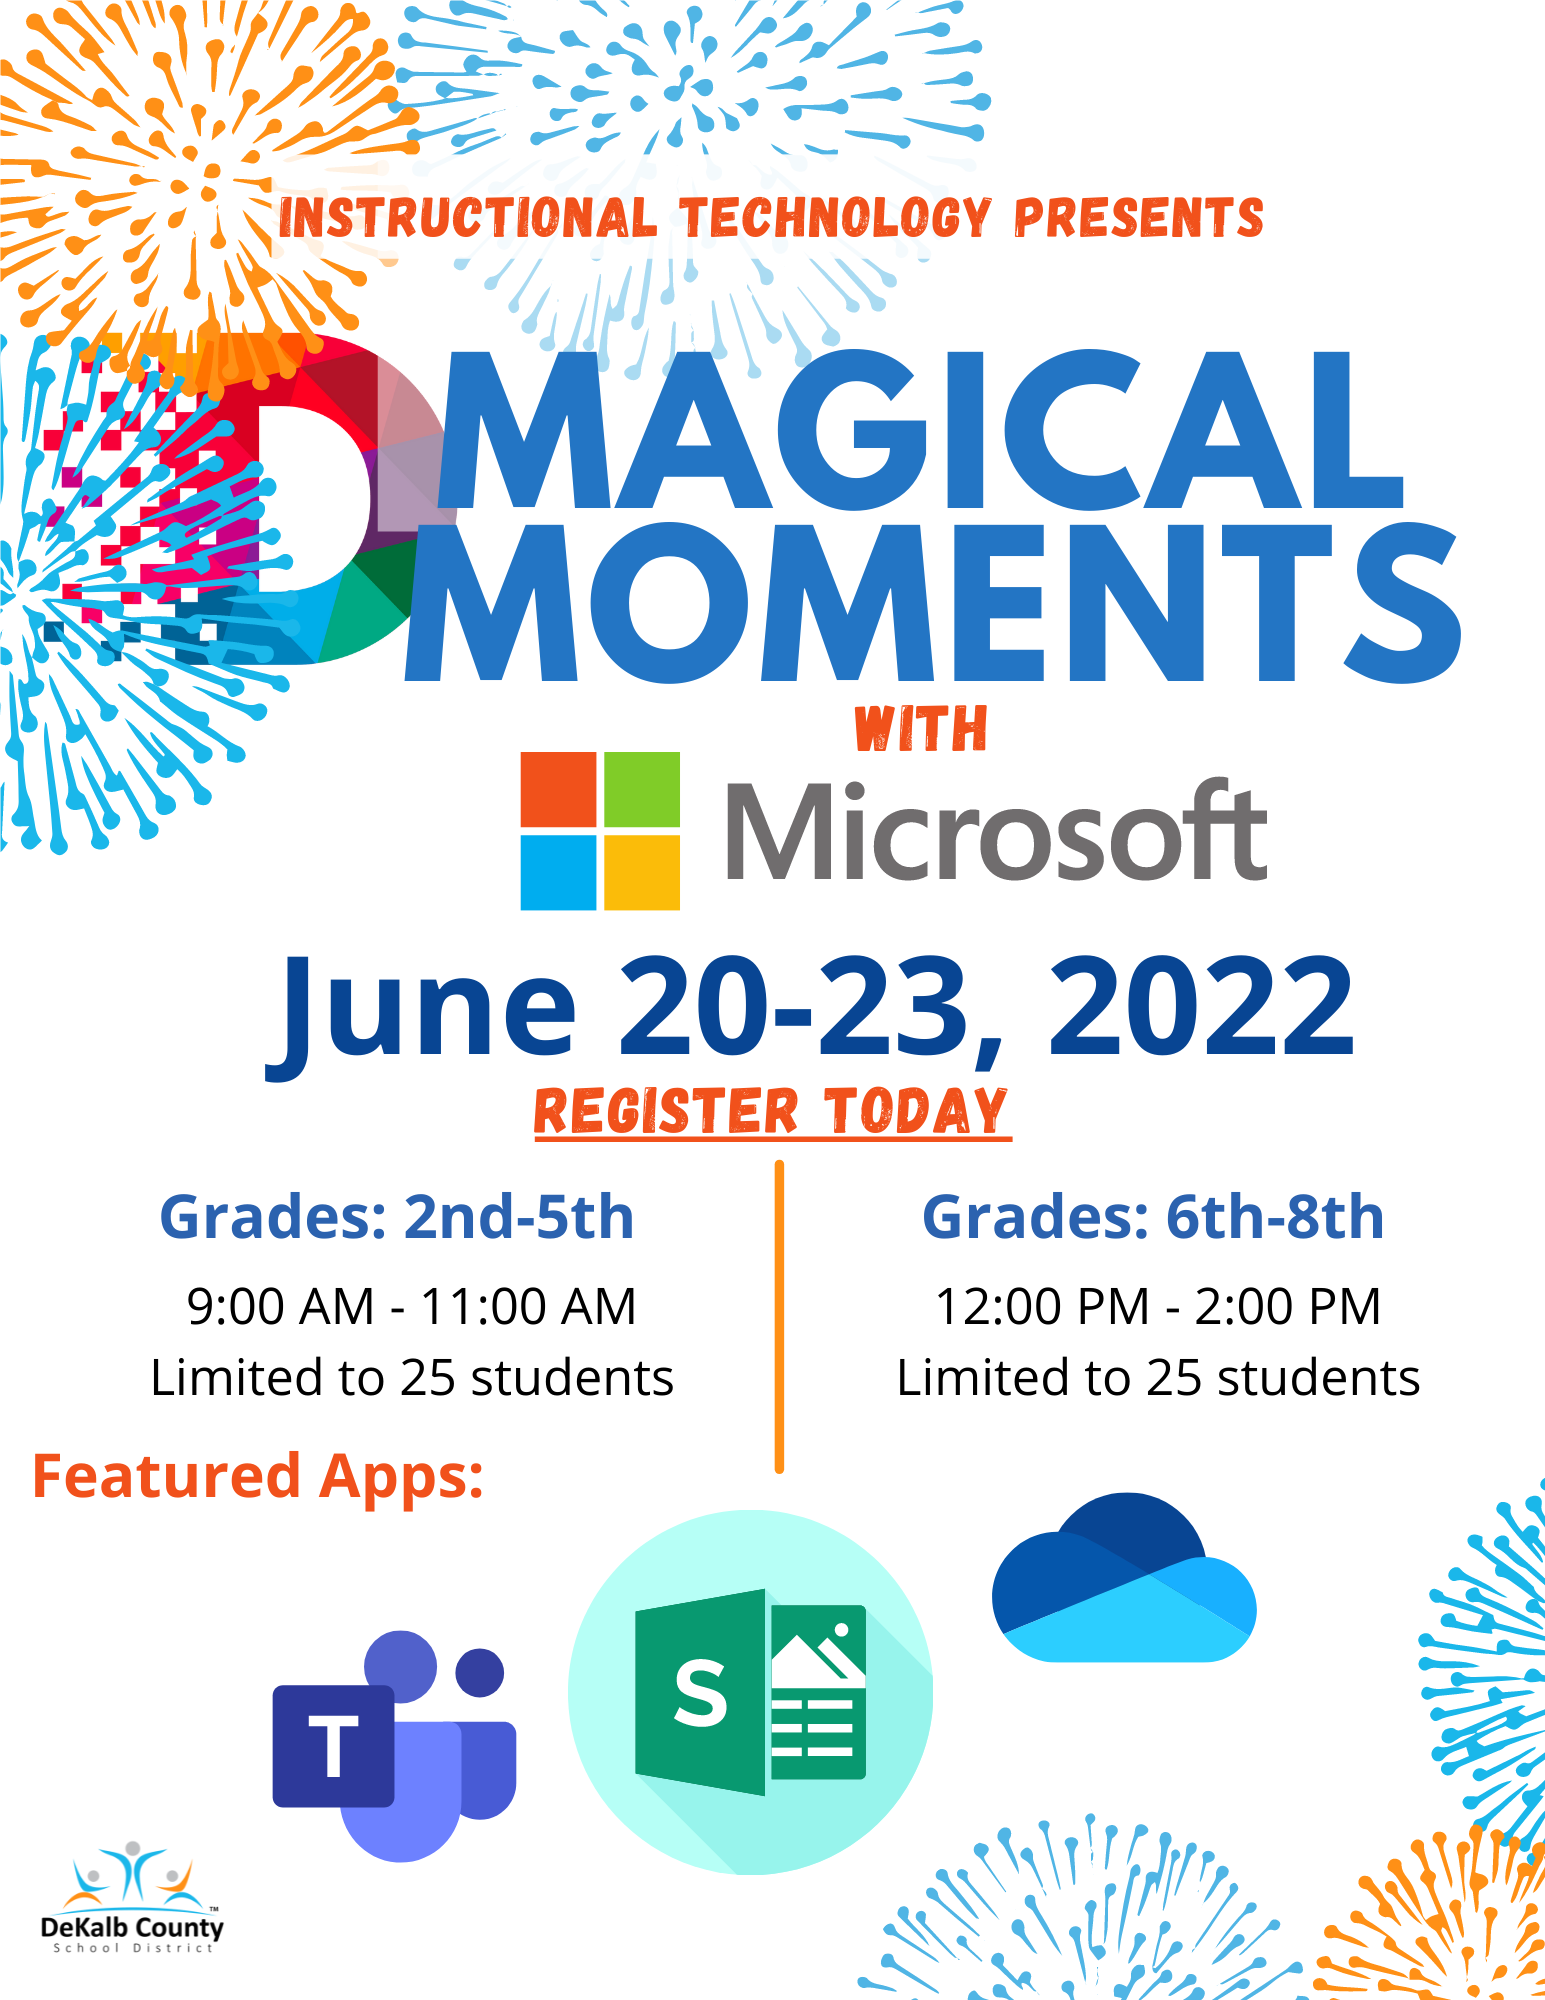 Magical Moments with Microsoft flyer